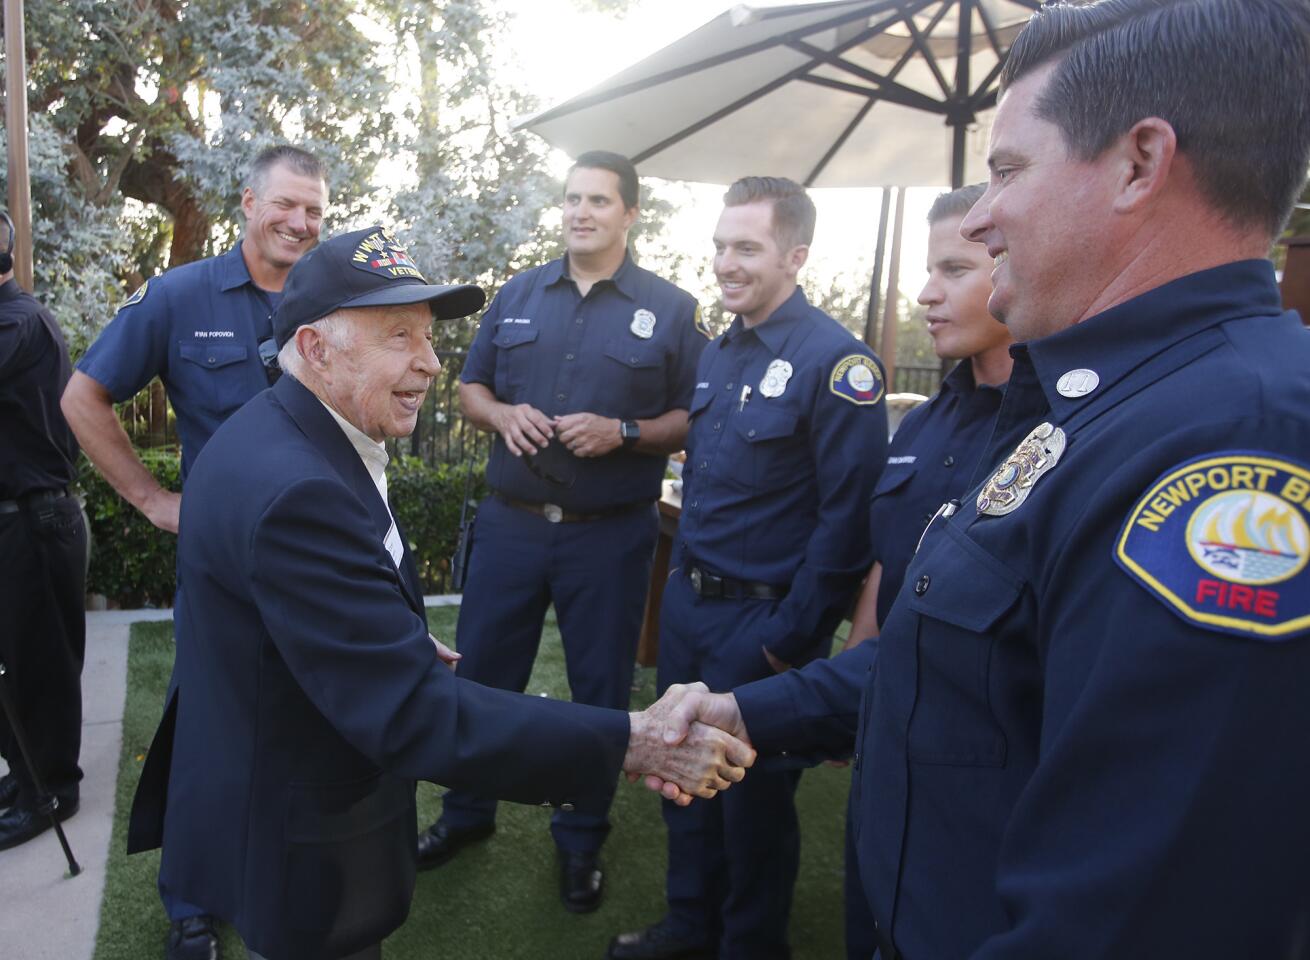 Tom Evans, a past skipper of the Newport Beach Chamber of Commerce Commodores Club, greets members of the city Fire Department at the 21st annual Newport Beach Fire and Lifeguard Appreciation Dinner on Thursday at the Newport Beach Marriott Hotel & Spa.